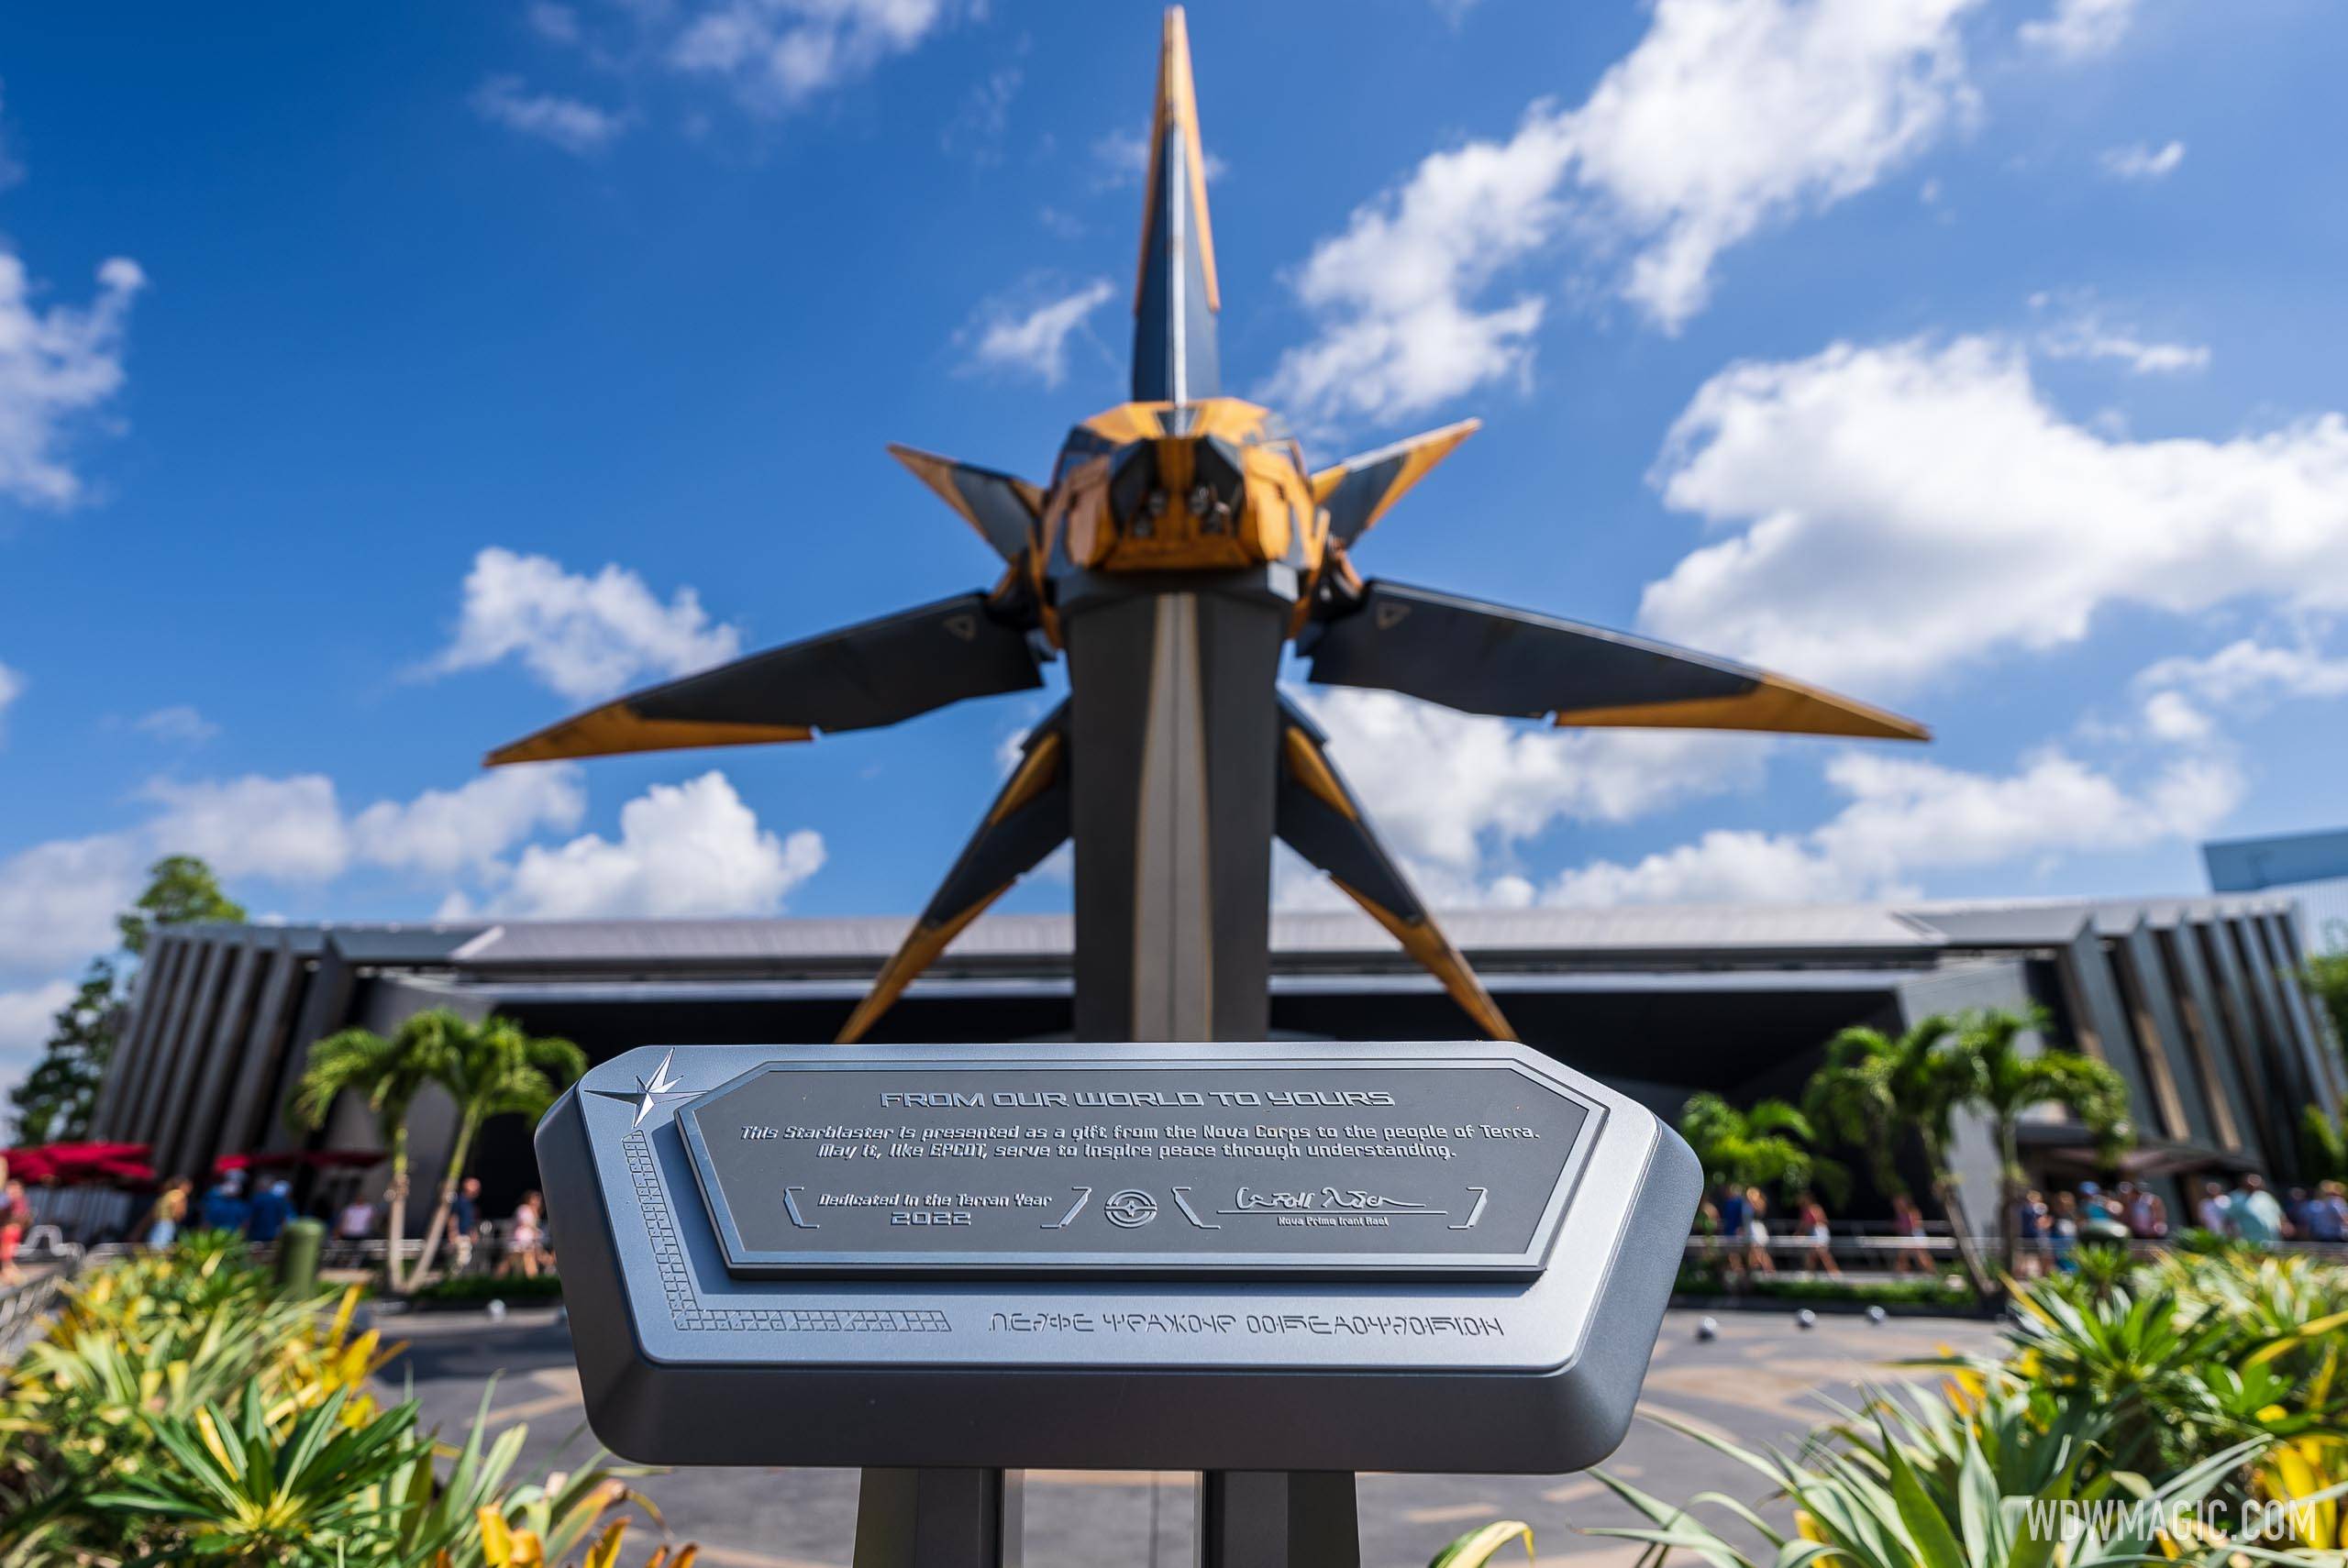 Dedication plaque added to the  Wonders of Xandar Pavilion at EPCOT